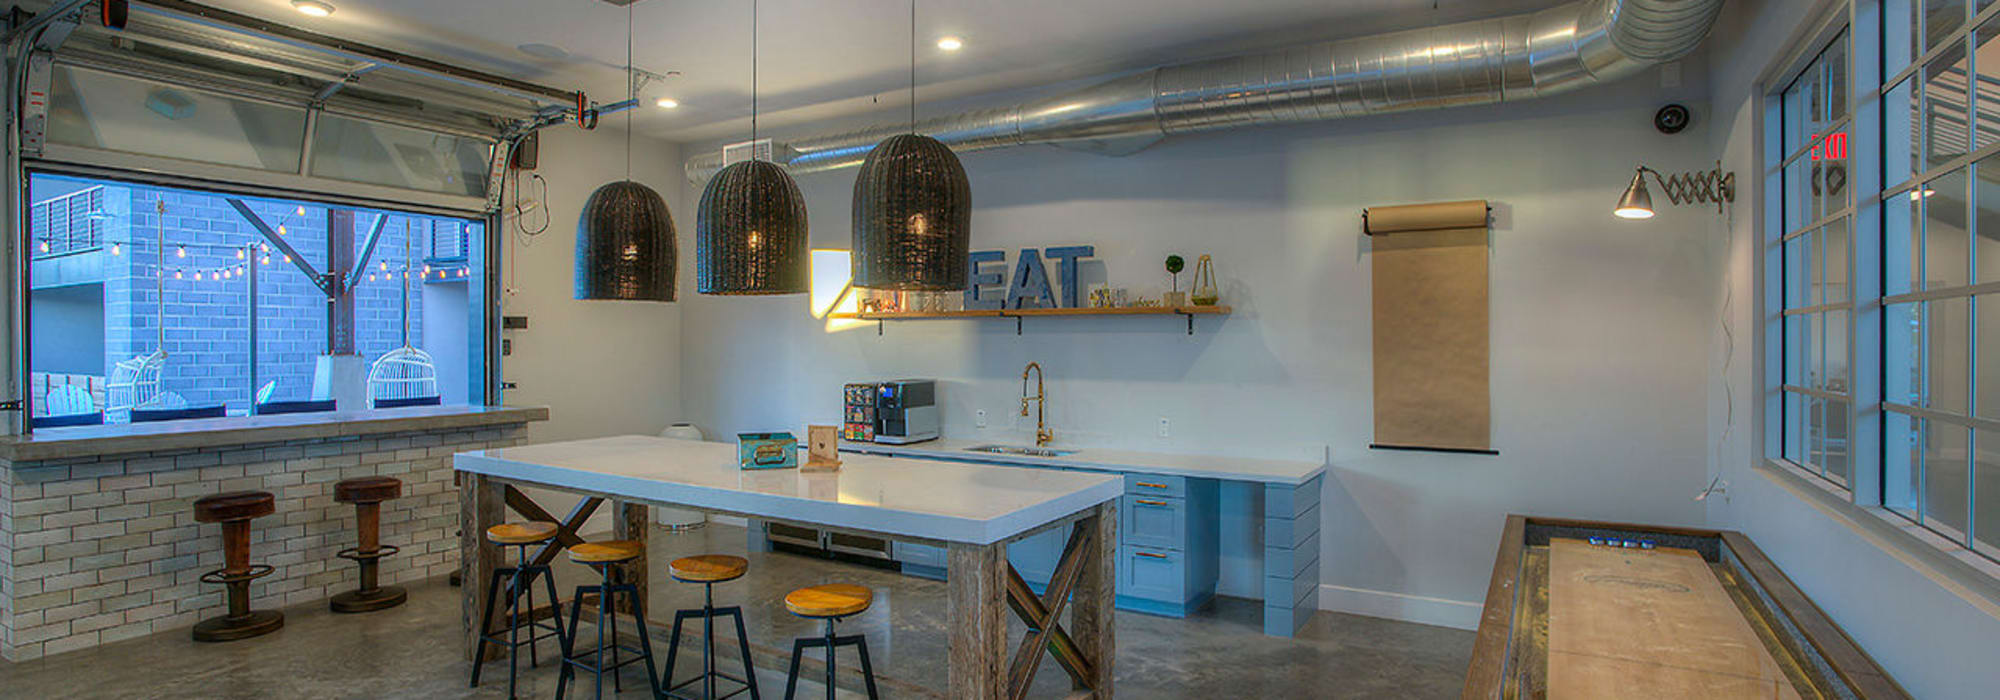 Kitchen for resident use in the clubhouse at District Lofts in Gilbert, Arizona